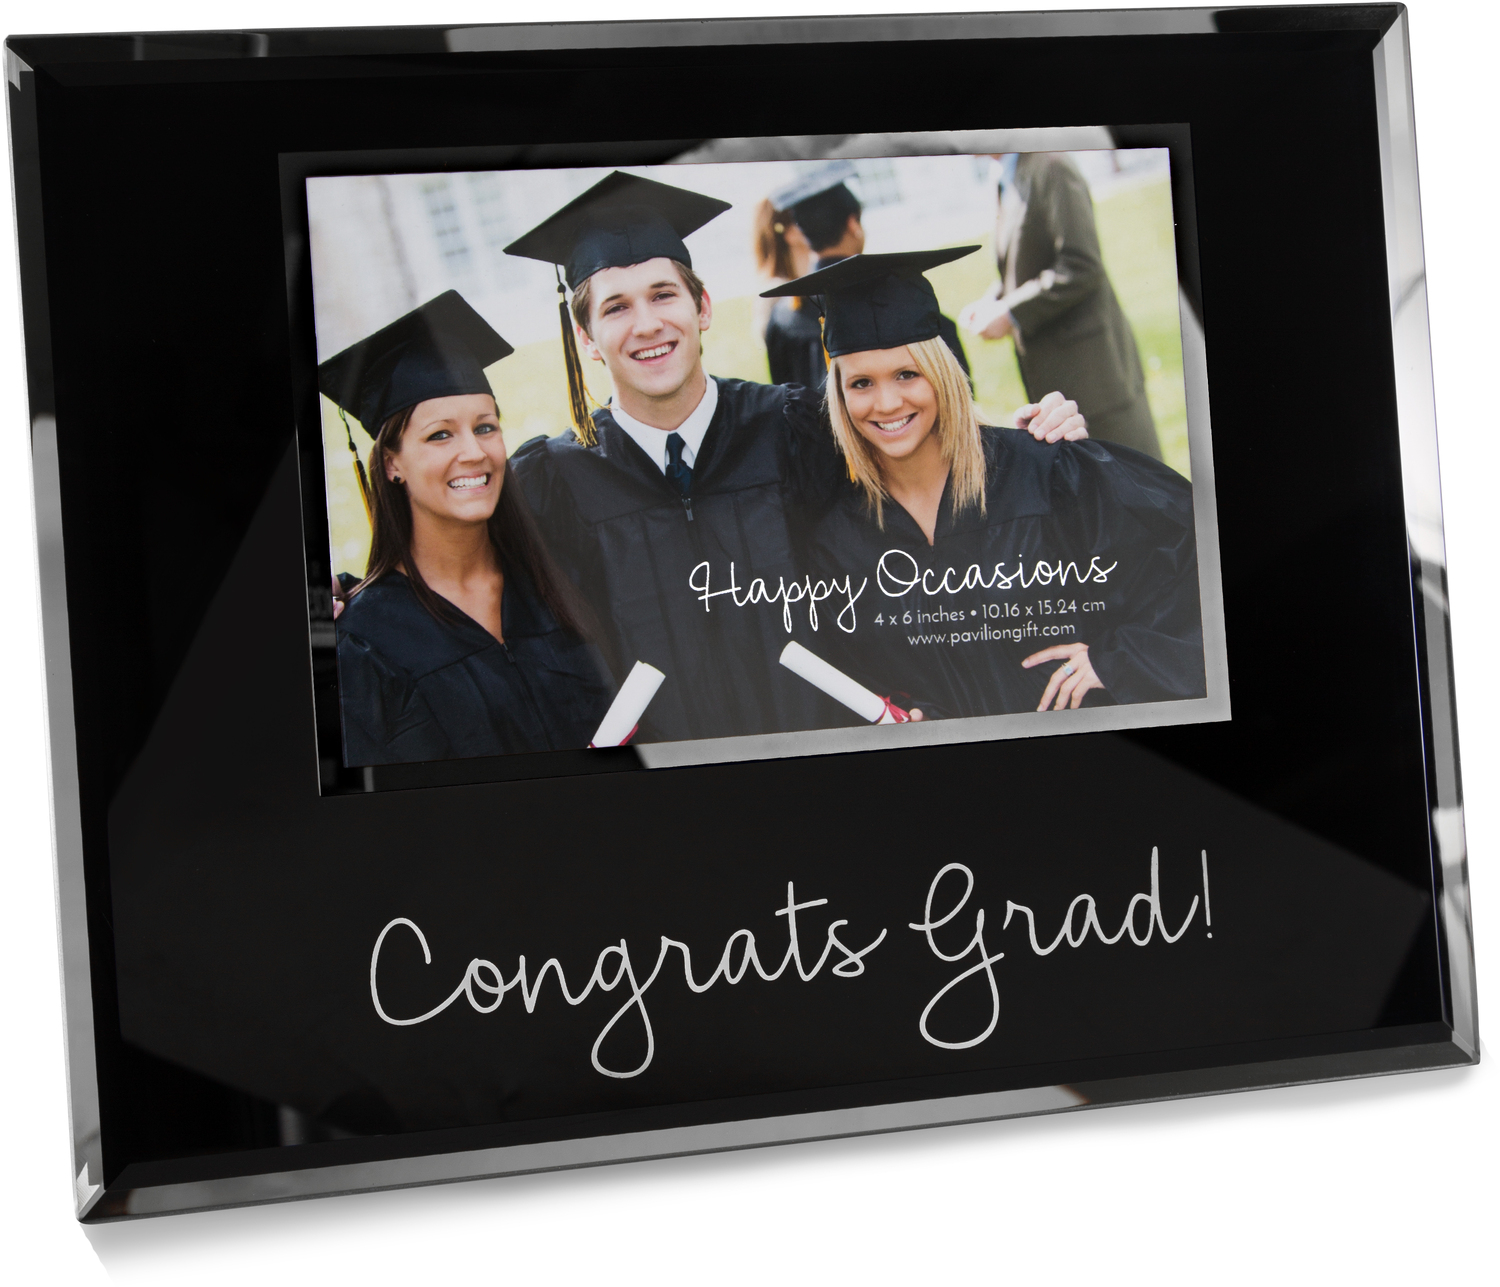 Congrats by Happy Occasions - Congrats - 9.25" x 7.25" Frame
(Holds 6" x 4" Photo)